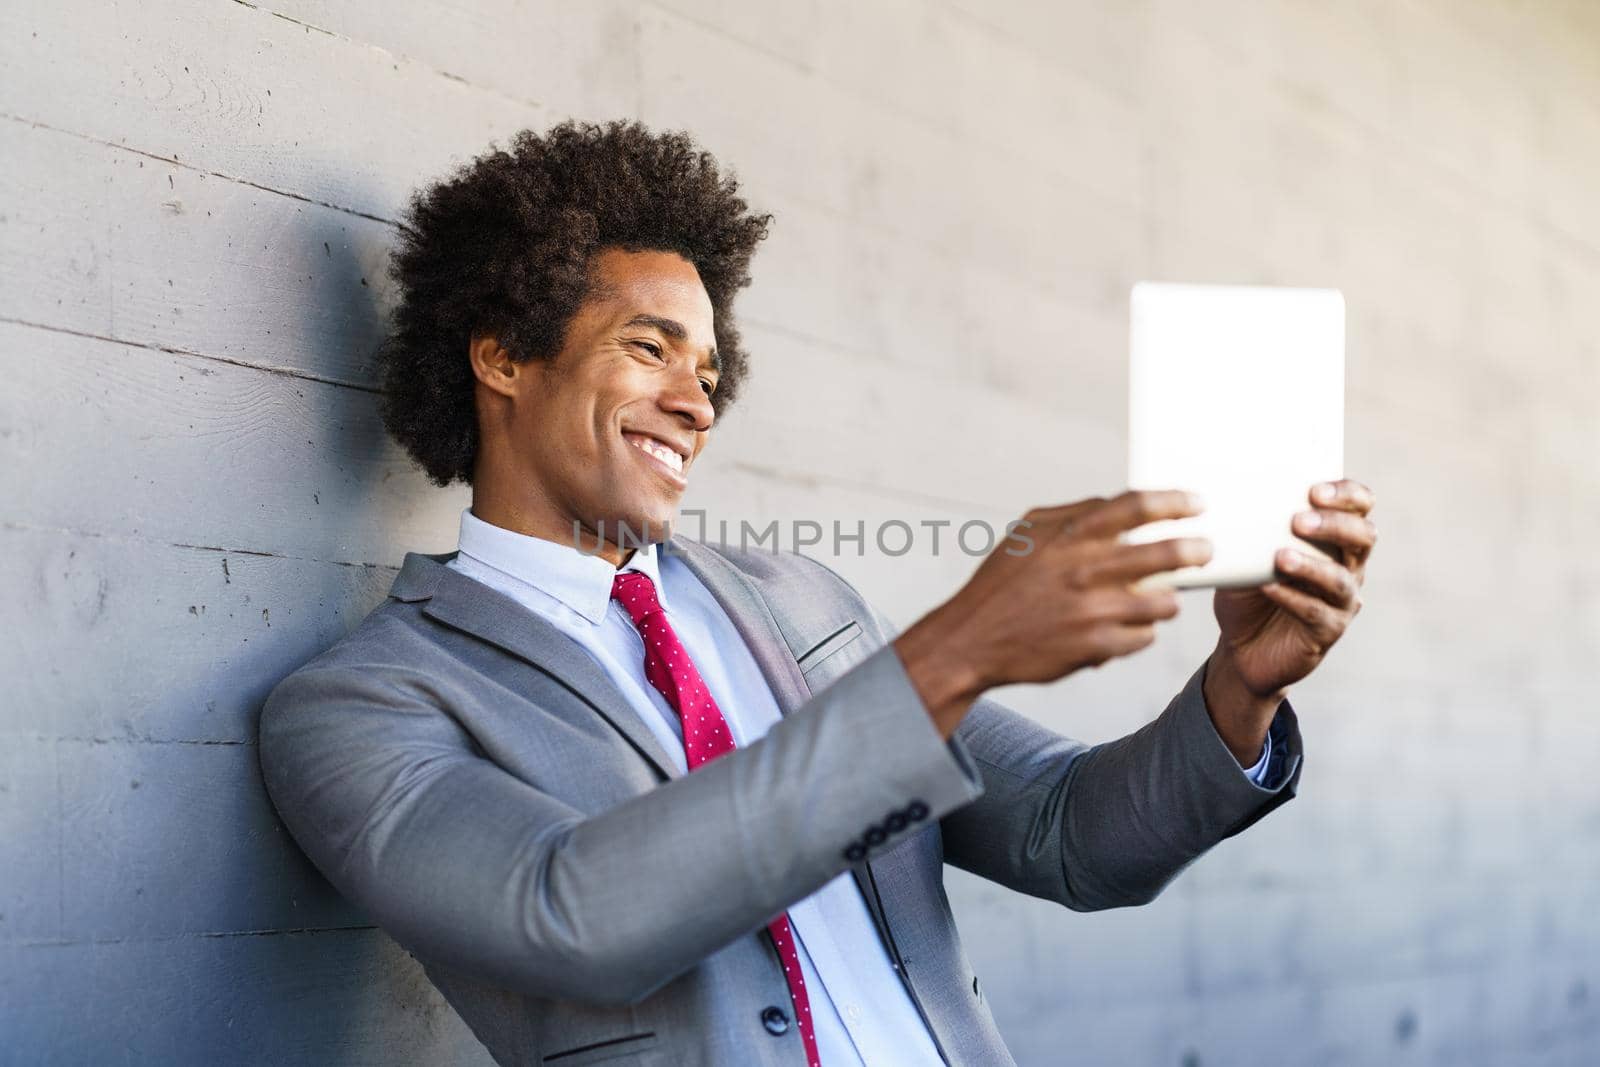 Black Businessman using a digital tablet in urban background. Man with afro hair.